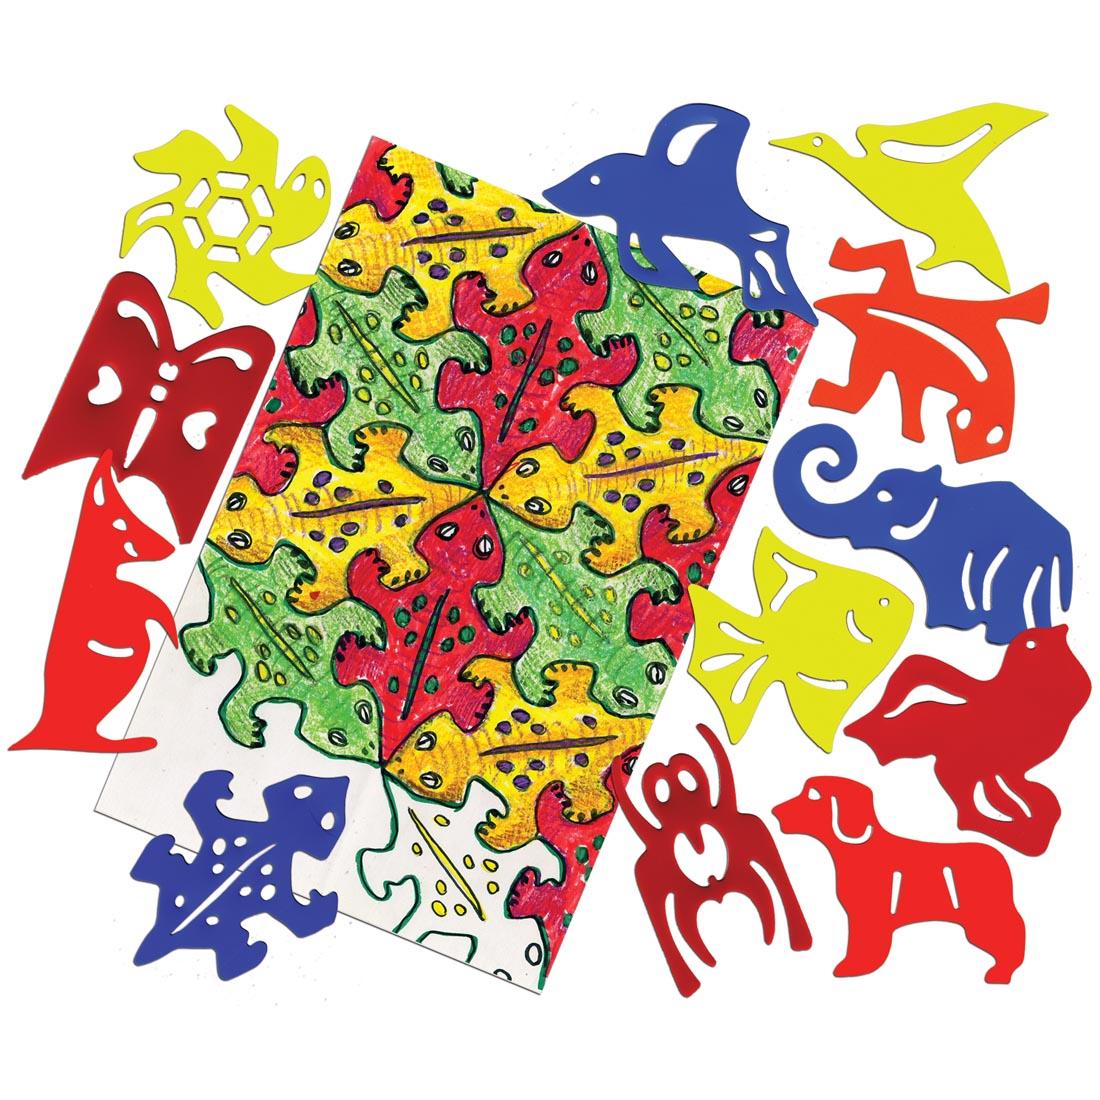 Roylco Animal Tessellation Templates surrounding an example drawing using the lizard stencil